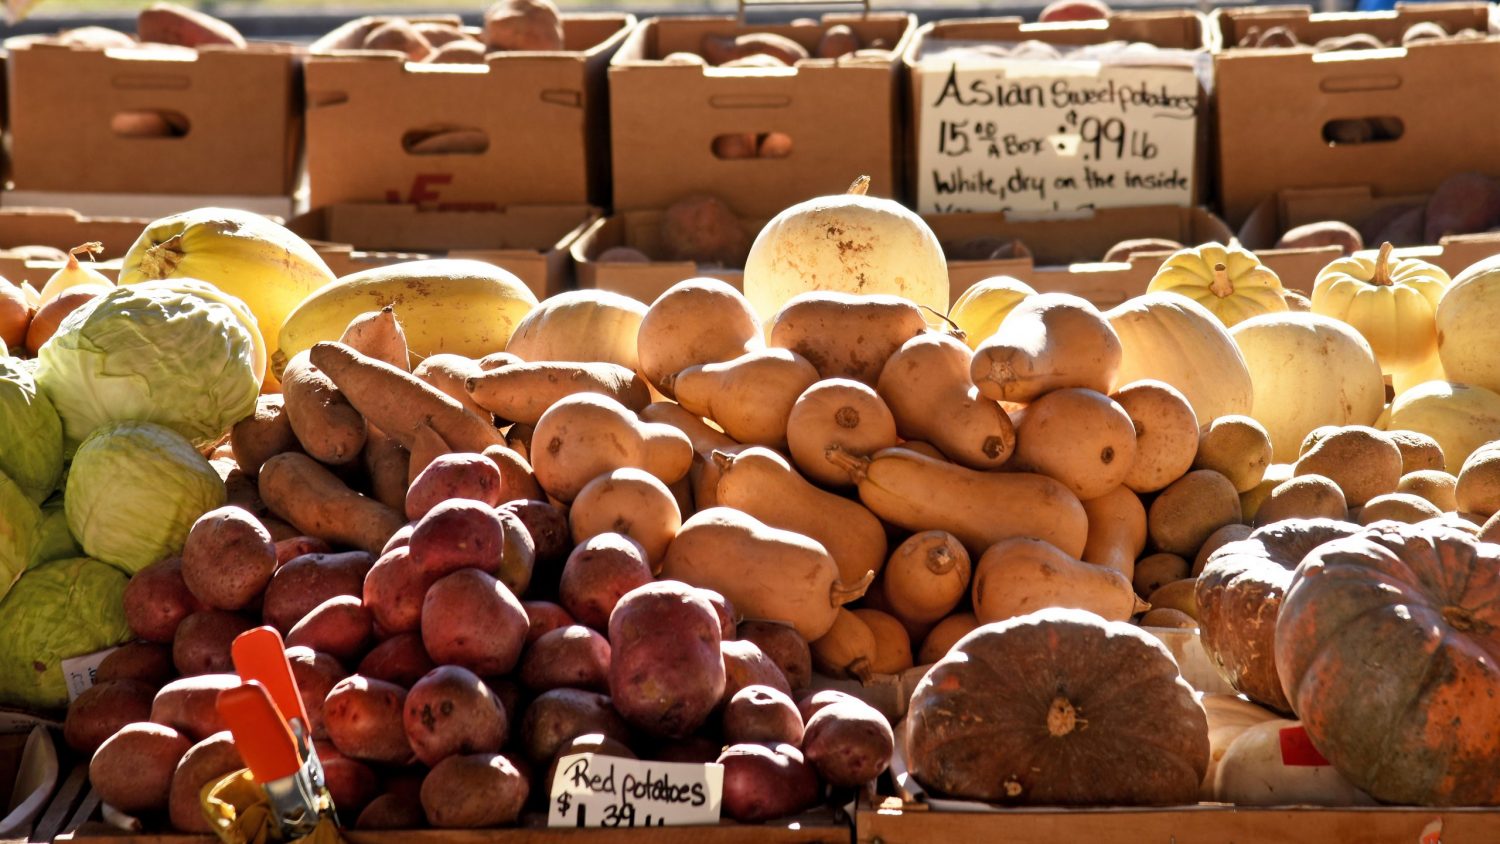 Grounds and other produce displayed at a farmers market stand